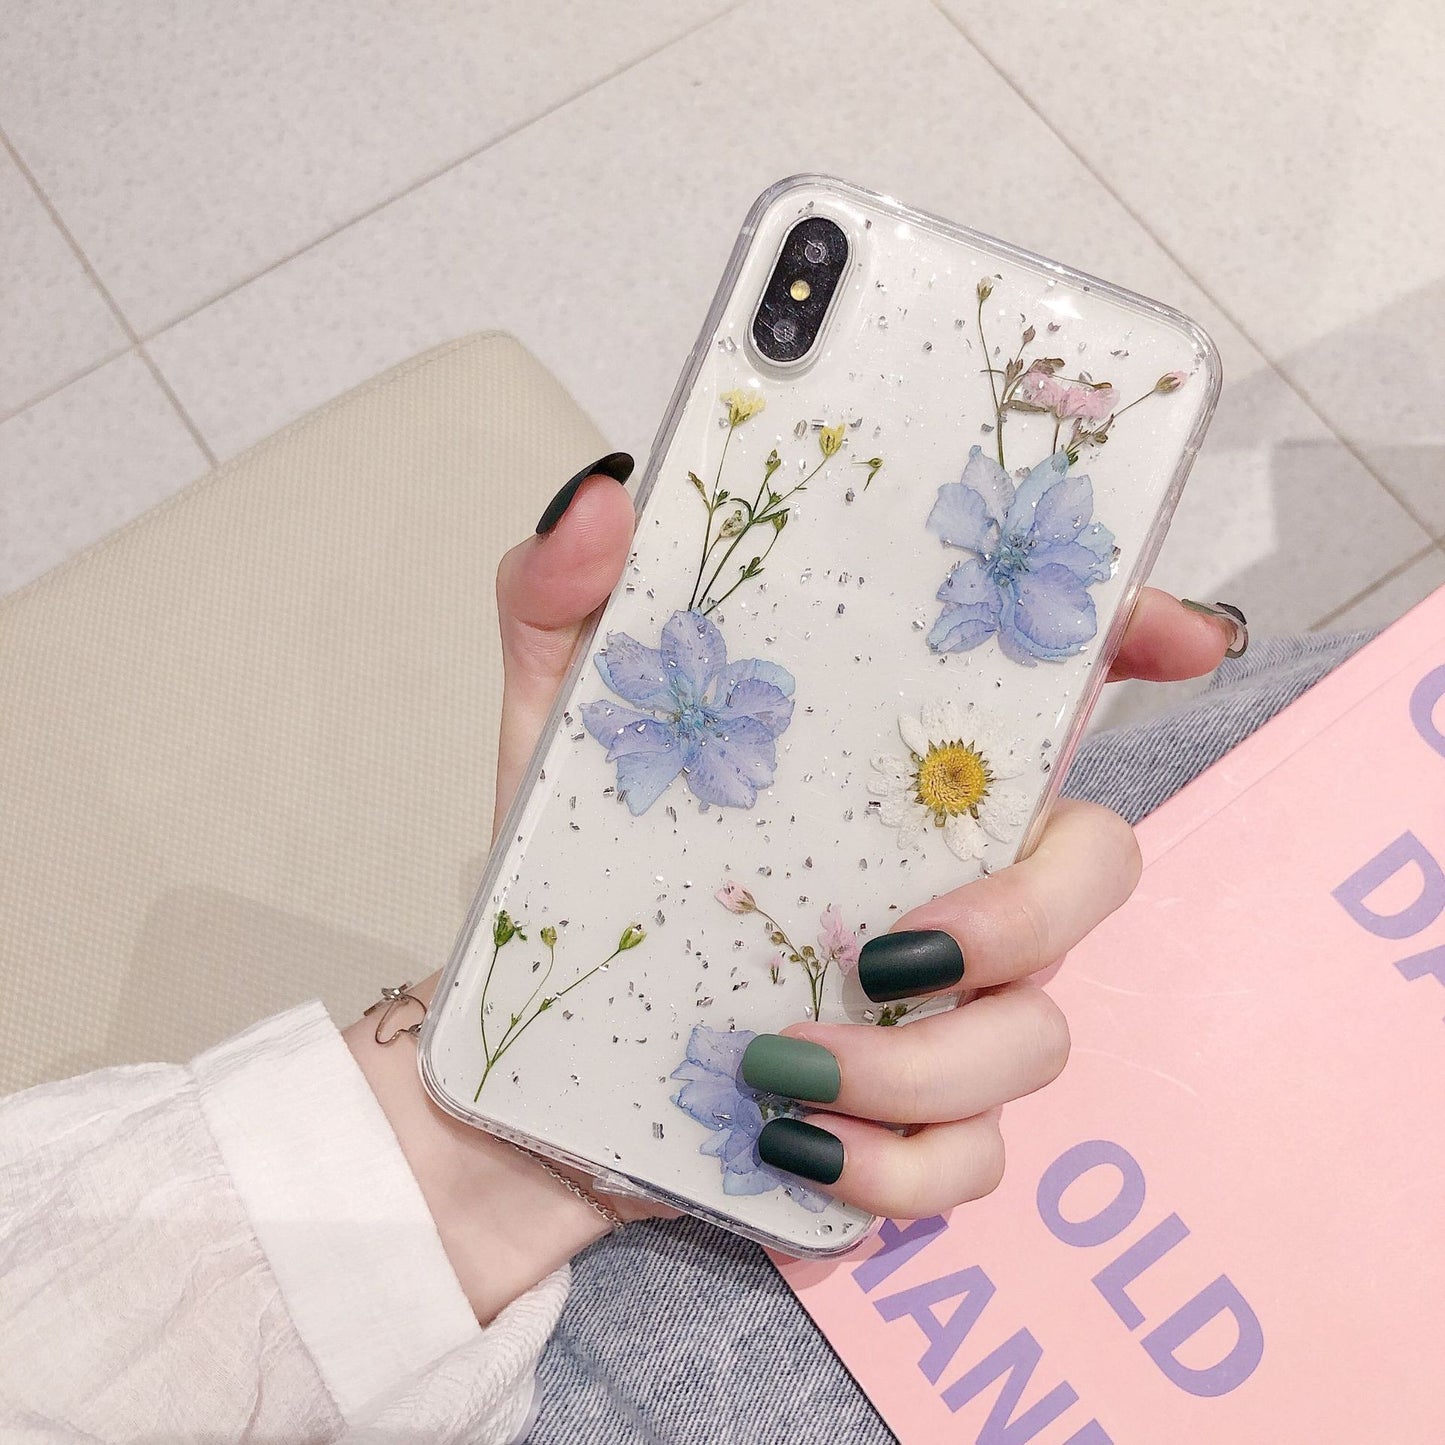 Fashion Glitter Real Dry Pressed Flower Phone Case Transparent Silicone Cover